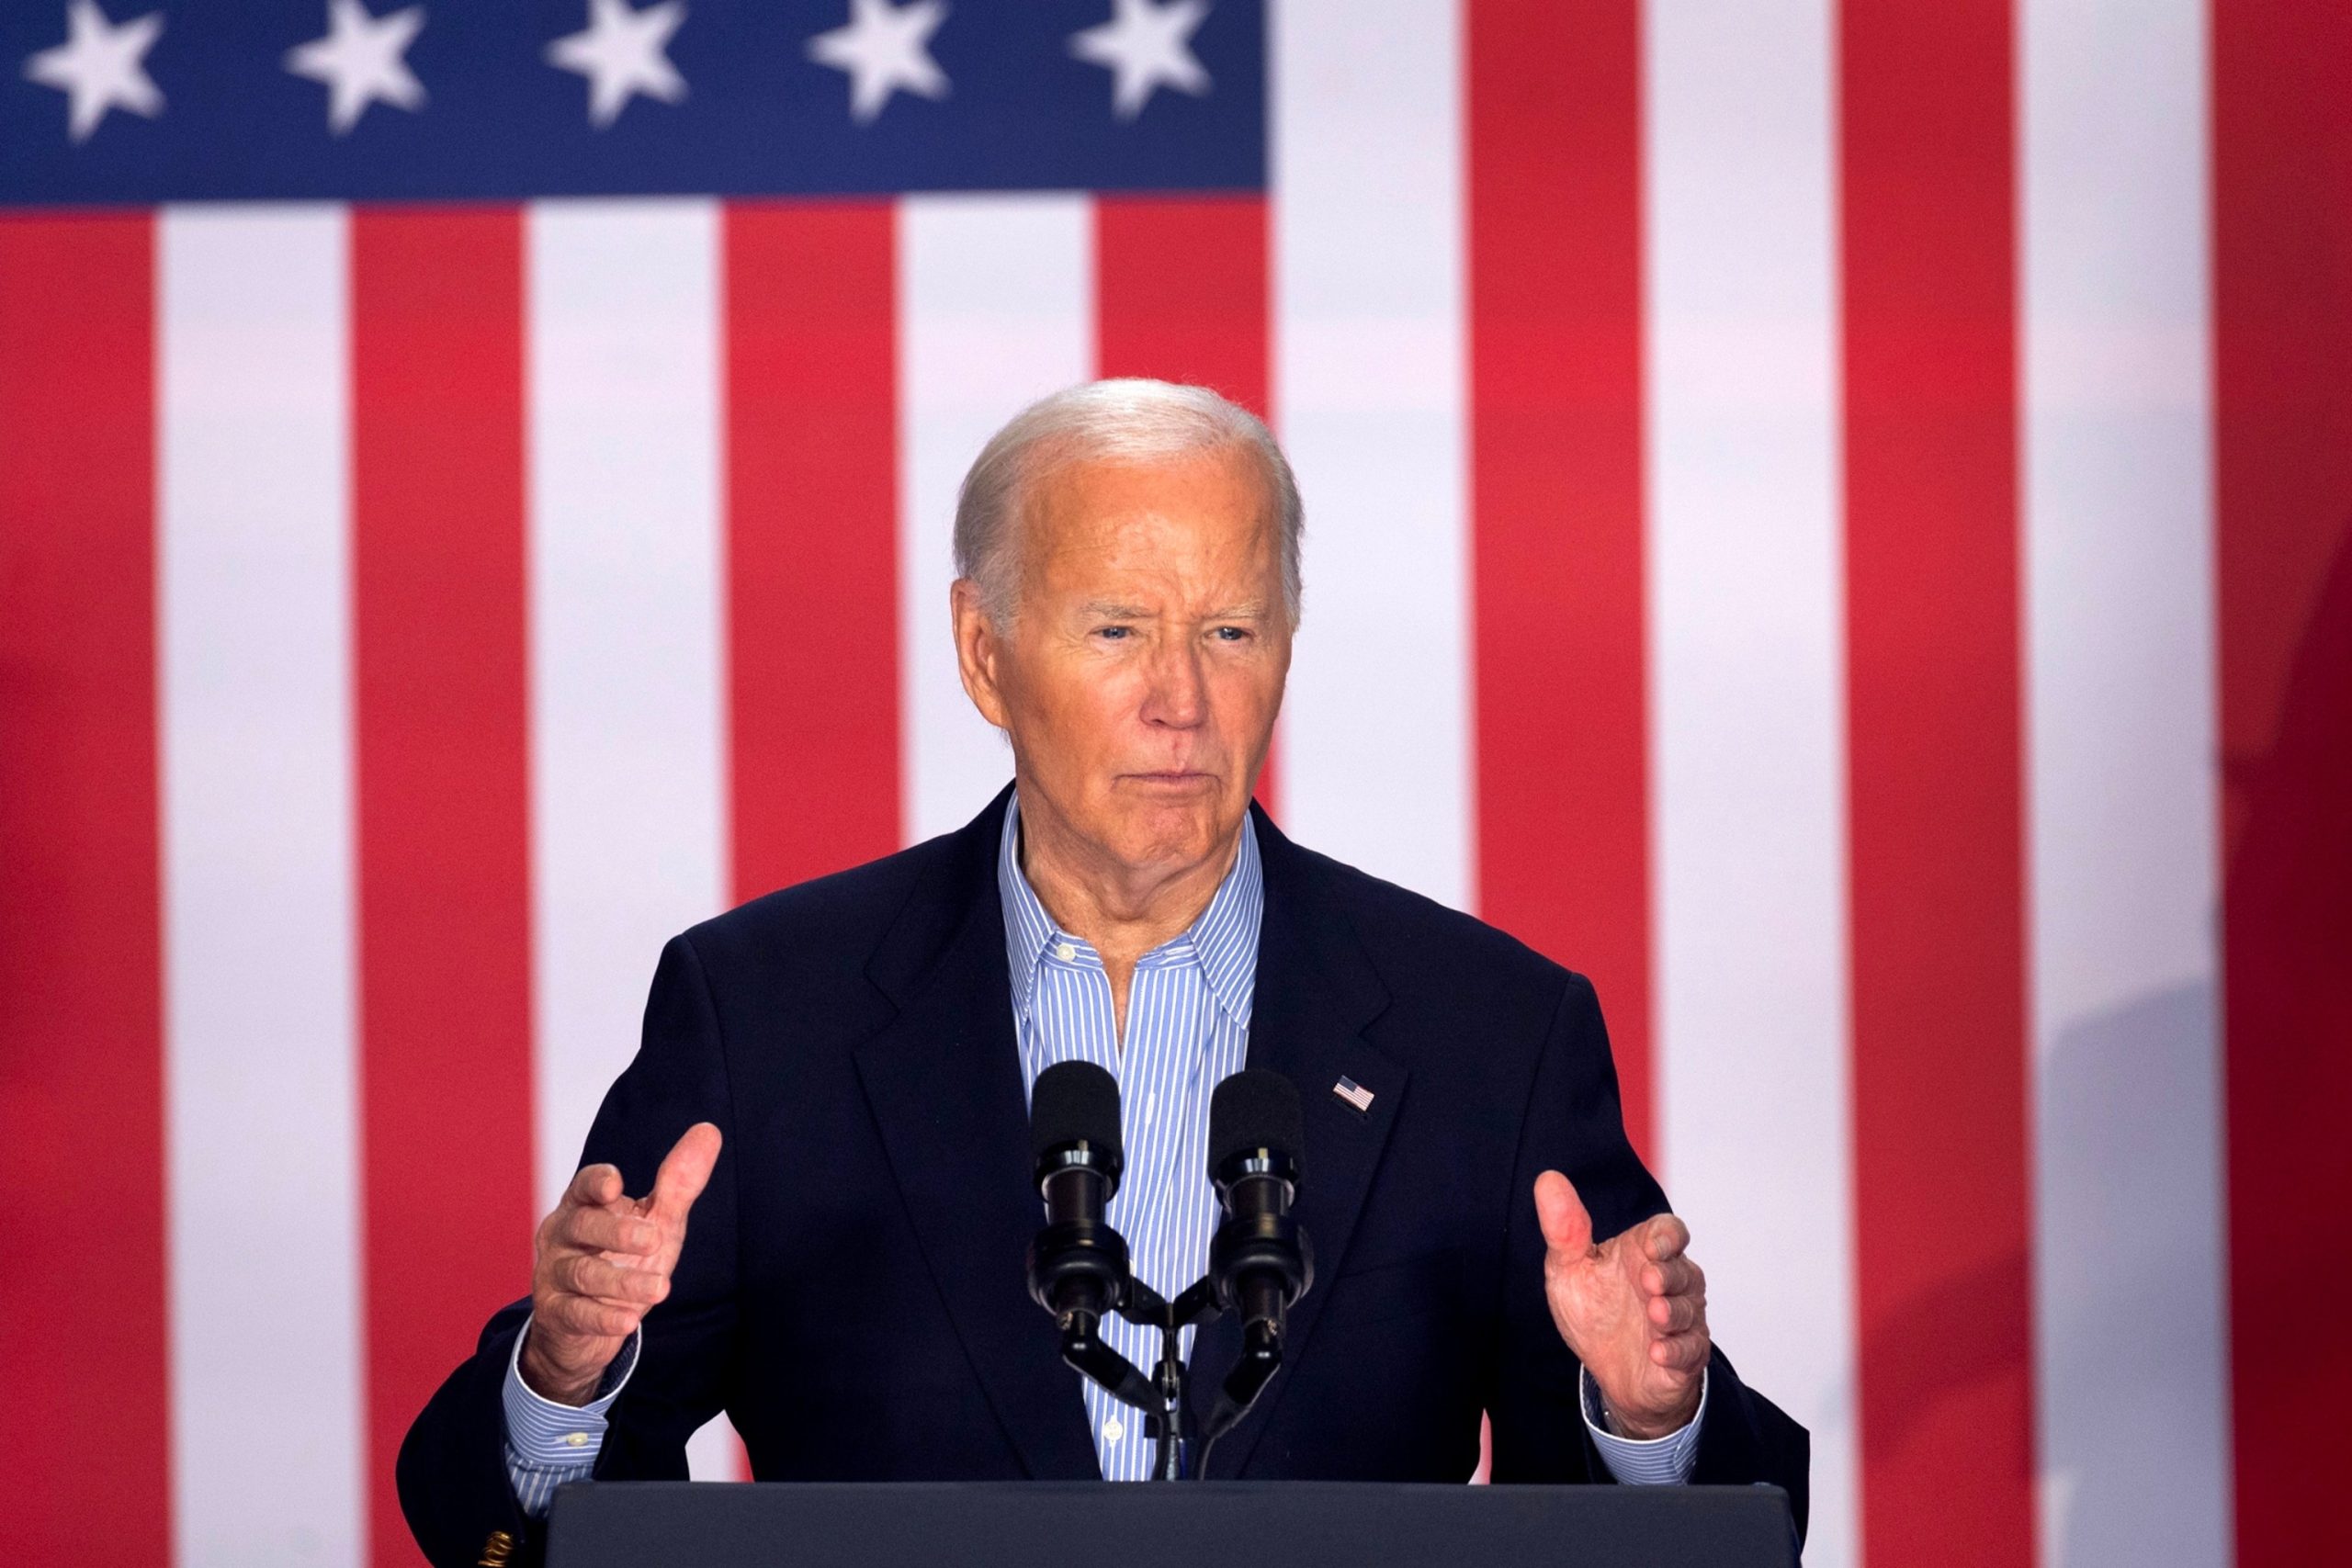 Second Local Radio Host Claims to Have Received Questions in Advance of Biden Interview